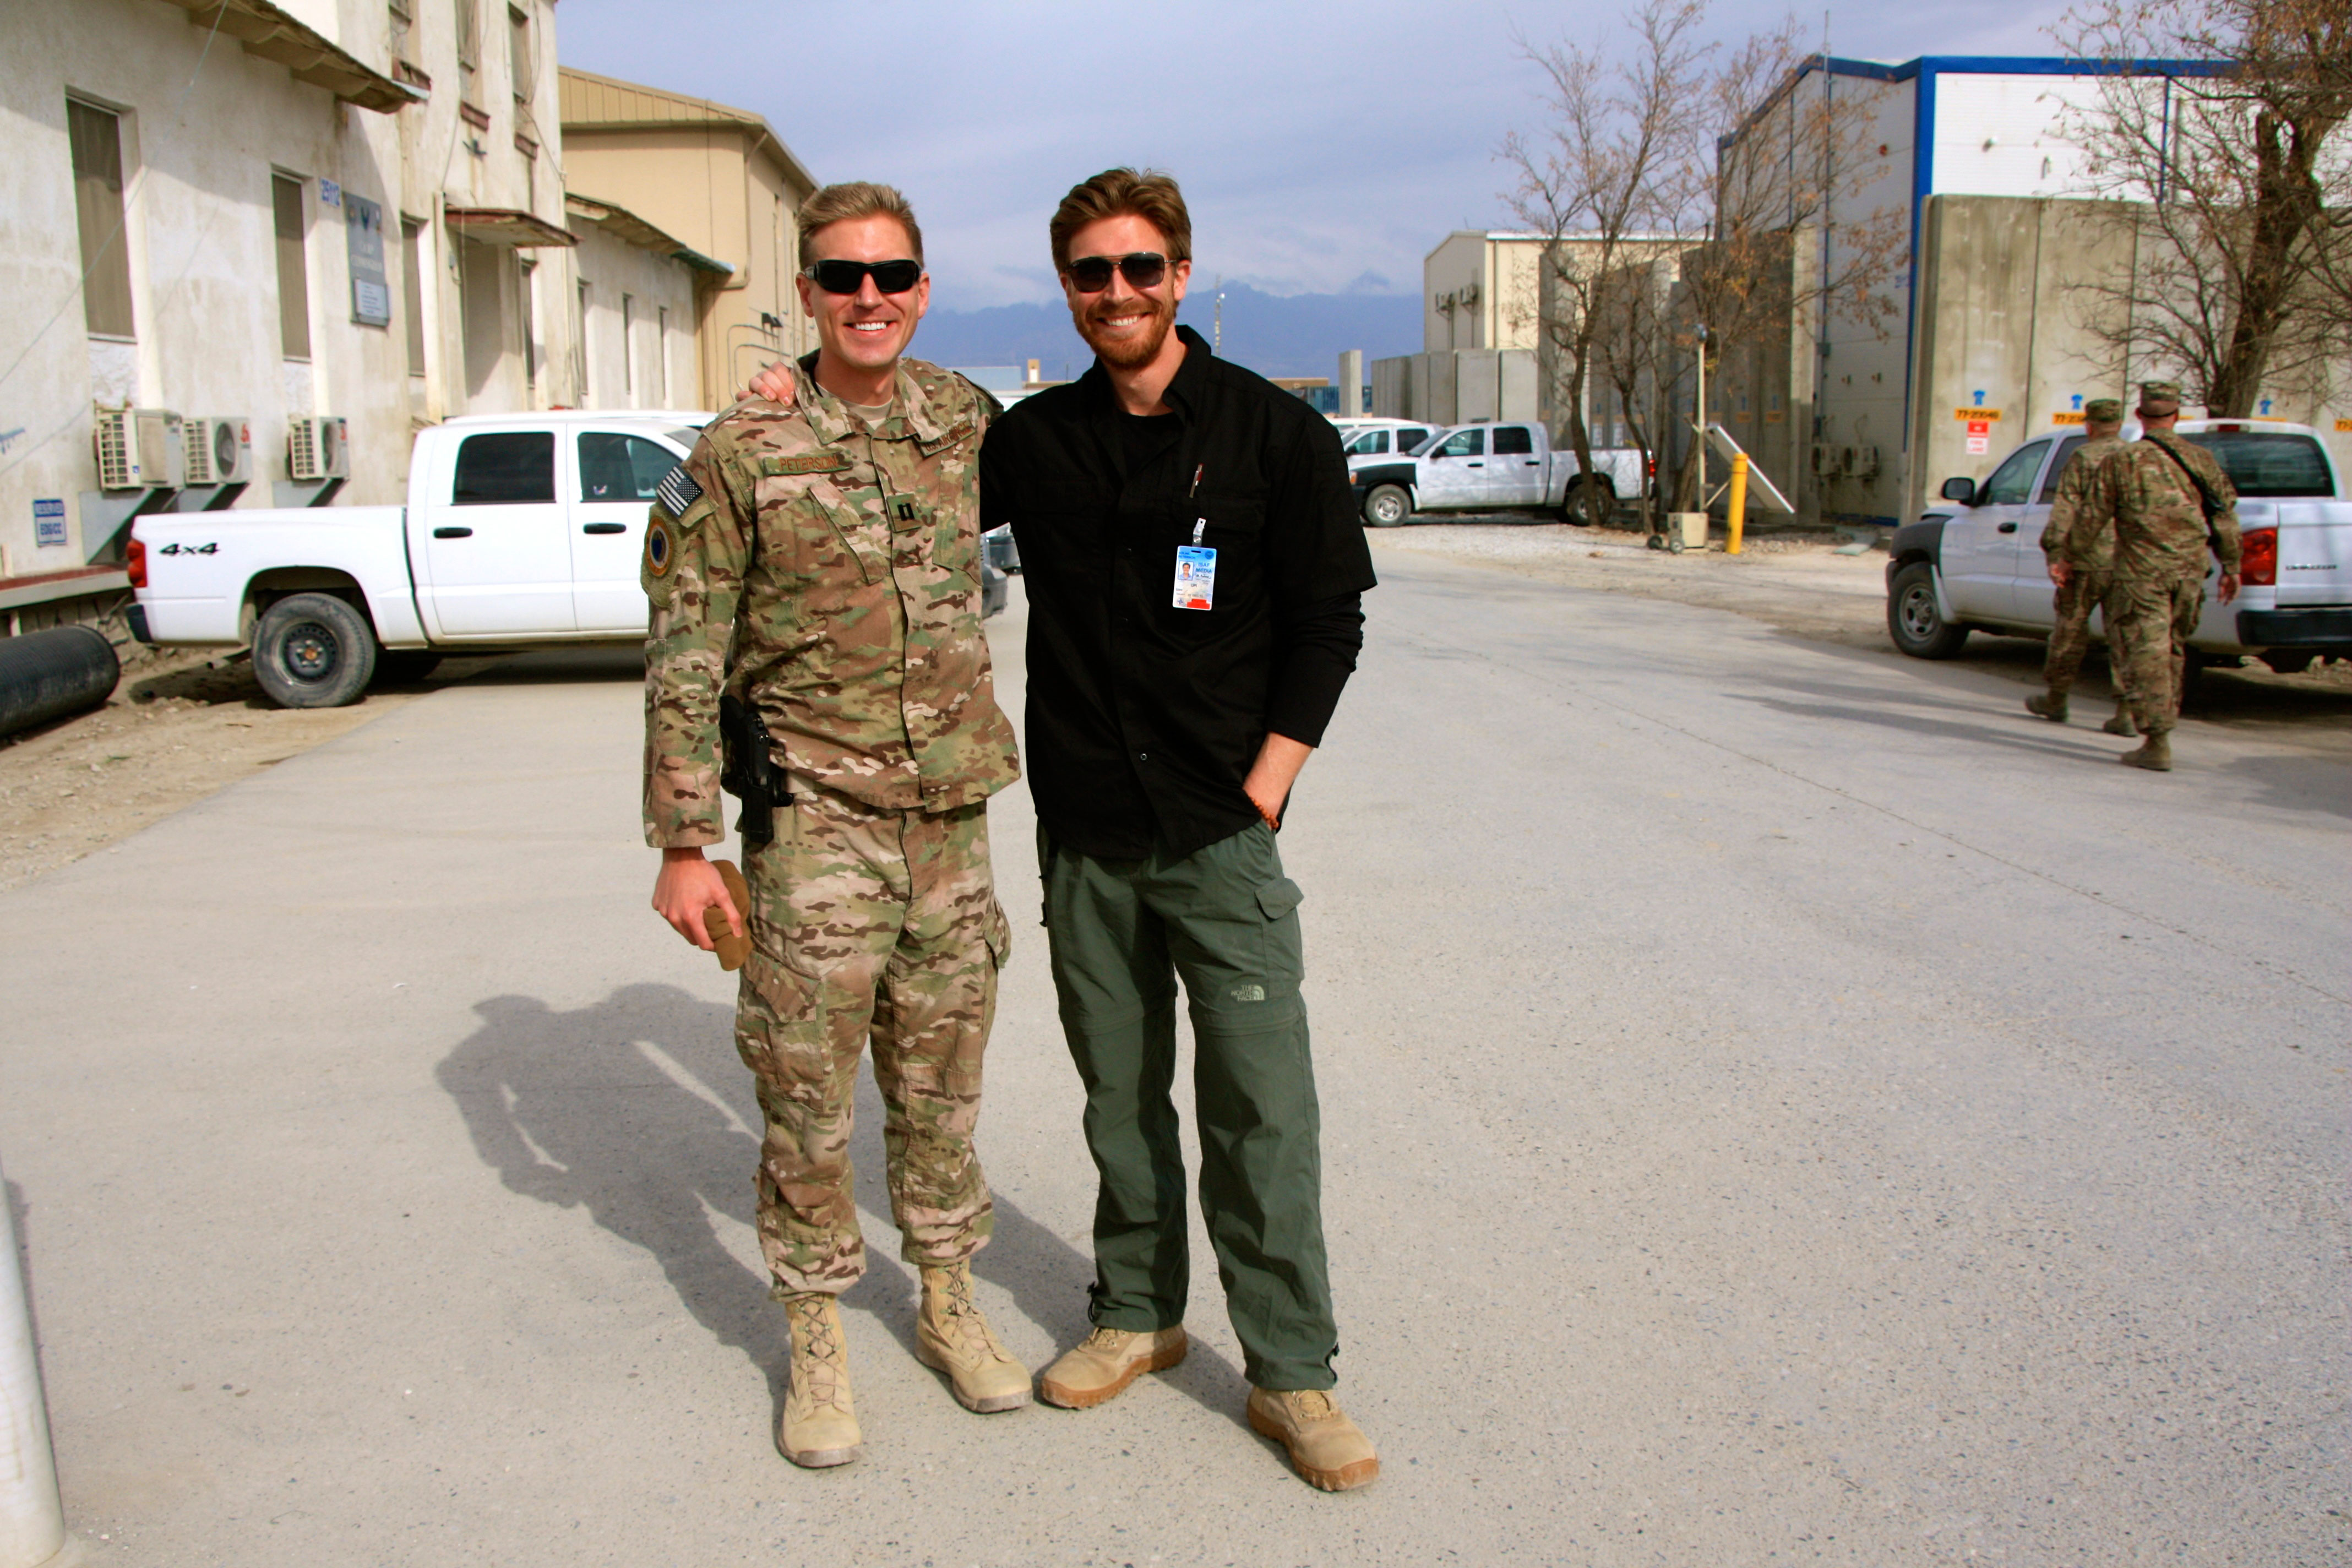 The author together with his brother in Afghanistan in 2013. (Photos: Nolan Peterson/The Daily Signal)